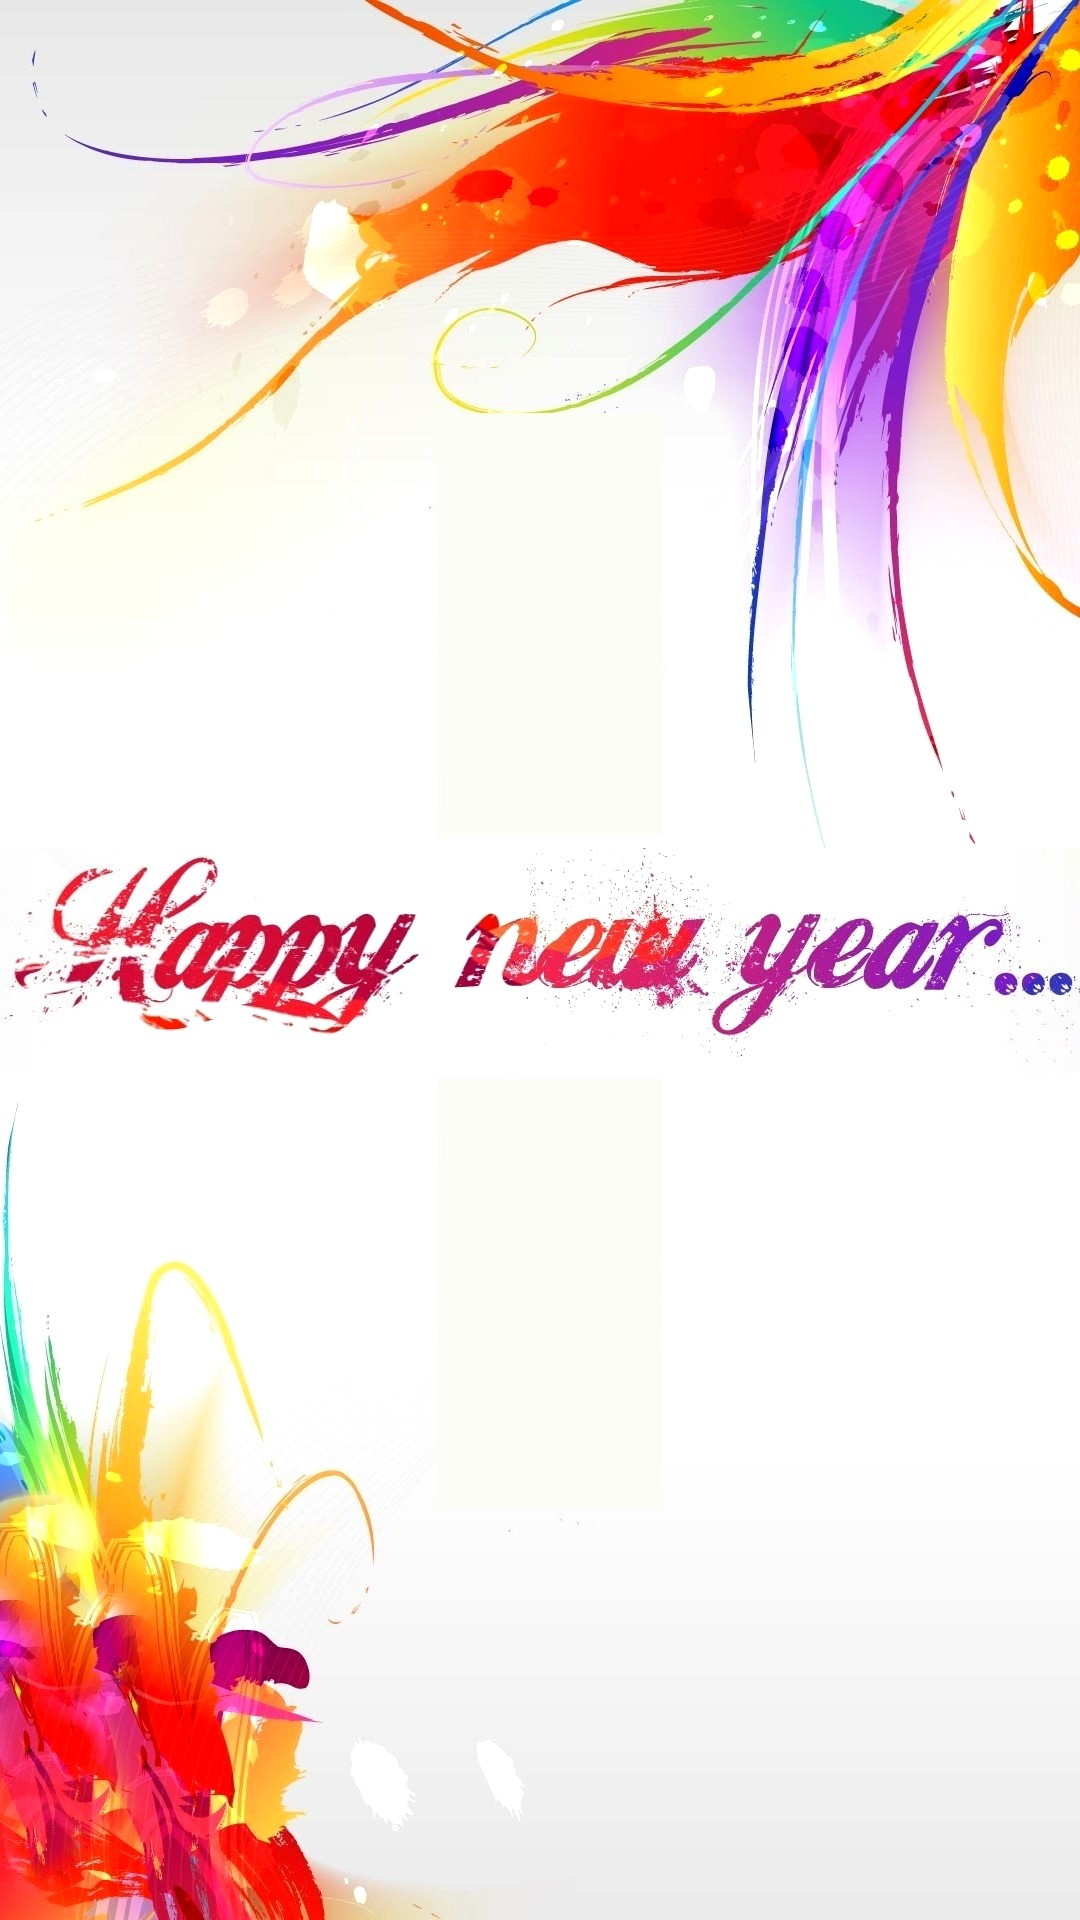 Wallpaper Mobile Happy New Year with high-resolution 1080x1920 pixel. You can use and set as wallpaper for Notebook Screensavers, Mac Wallpapers, Mobile Home Screen, iPhone or Android Phones Lock Screen